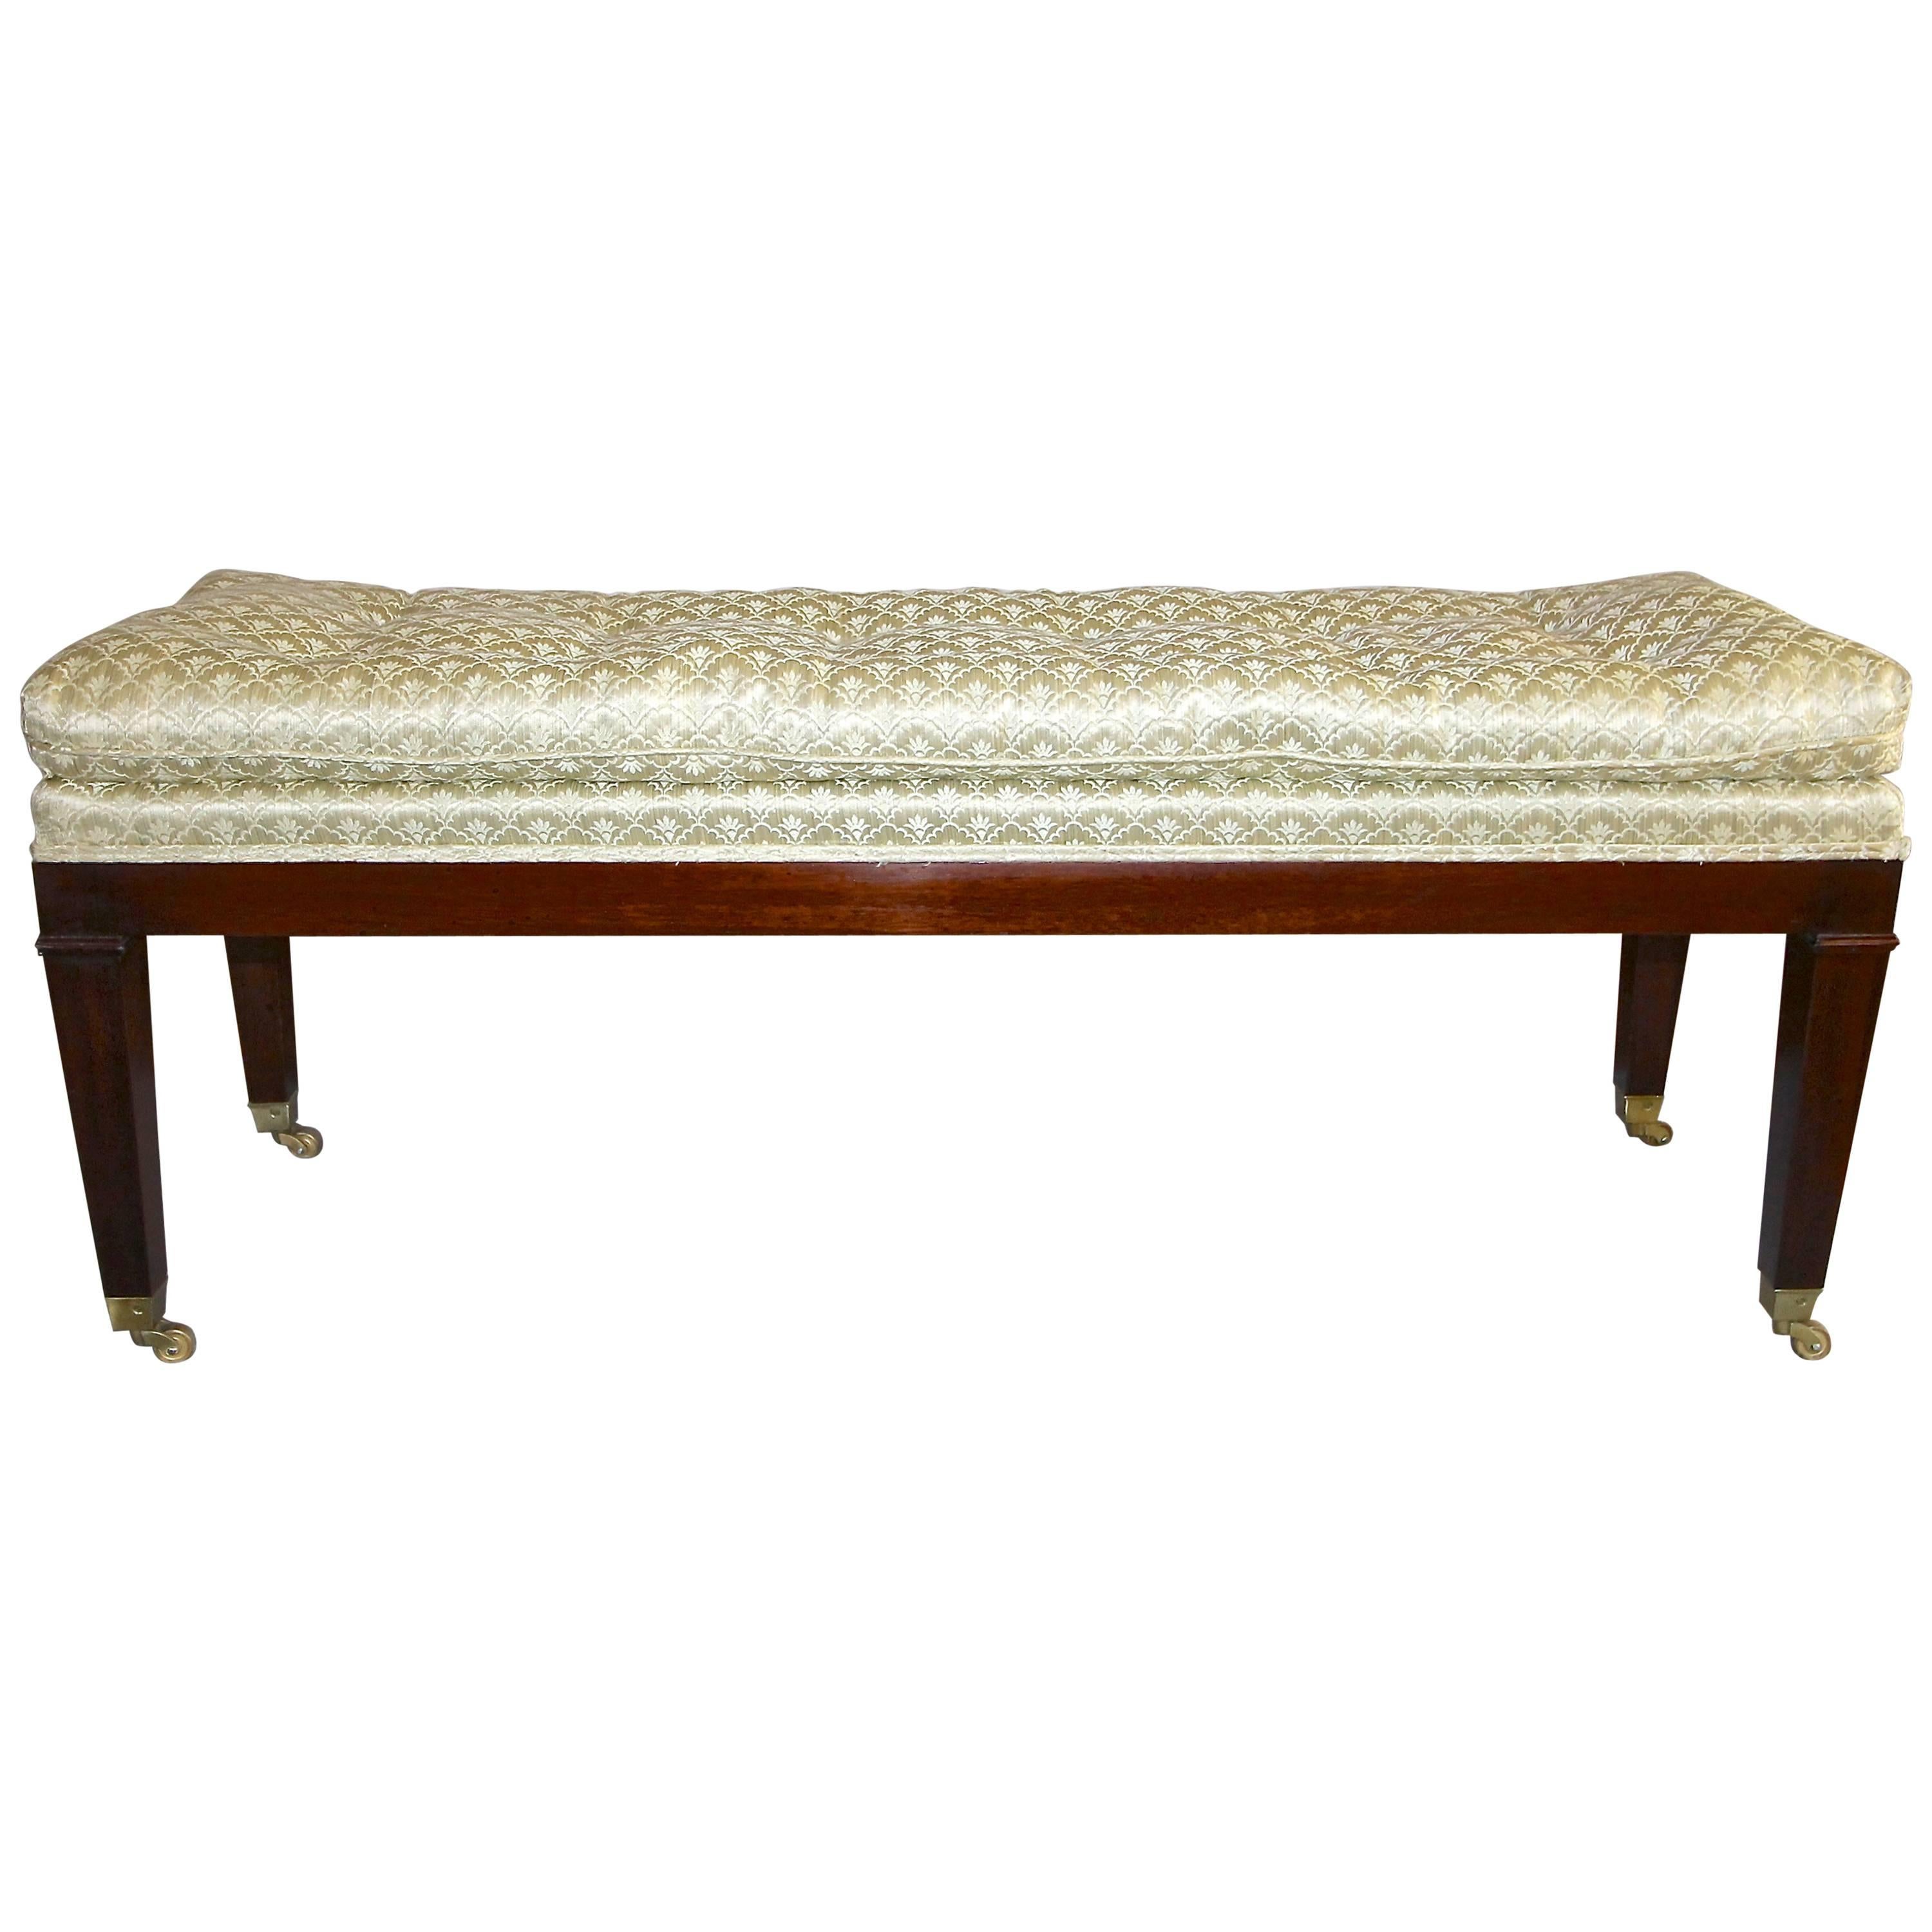 Upholstered Mahogany Long Bench with Brass Casters For Sale